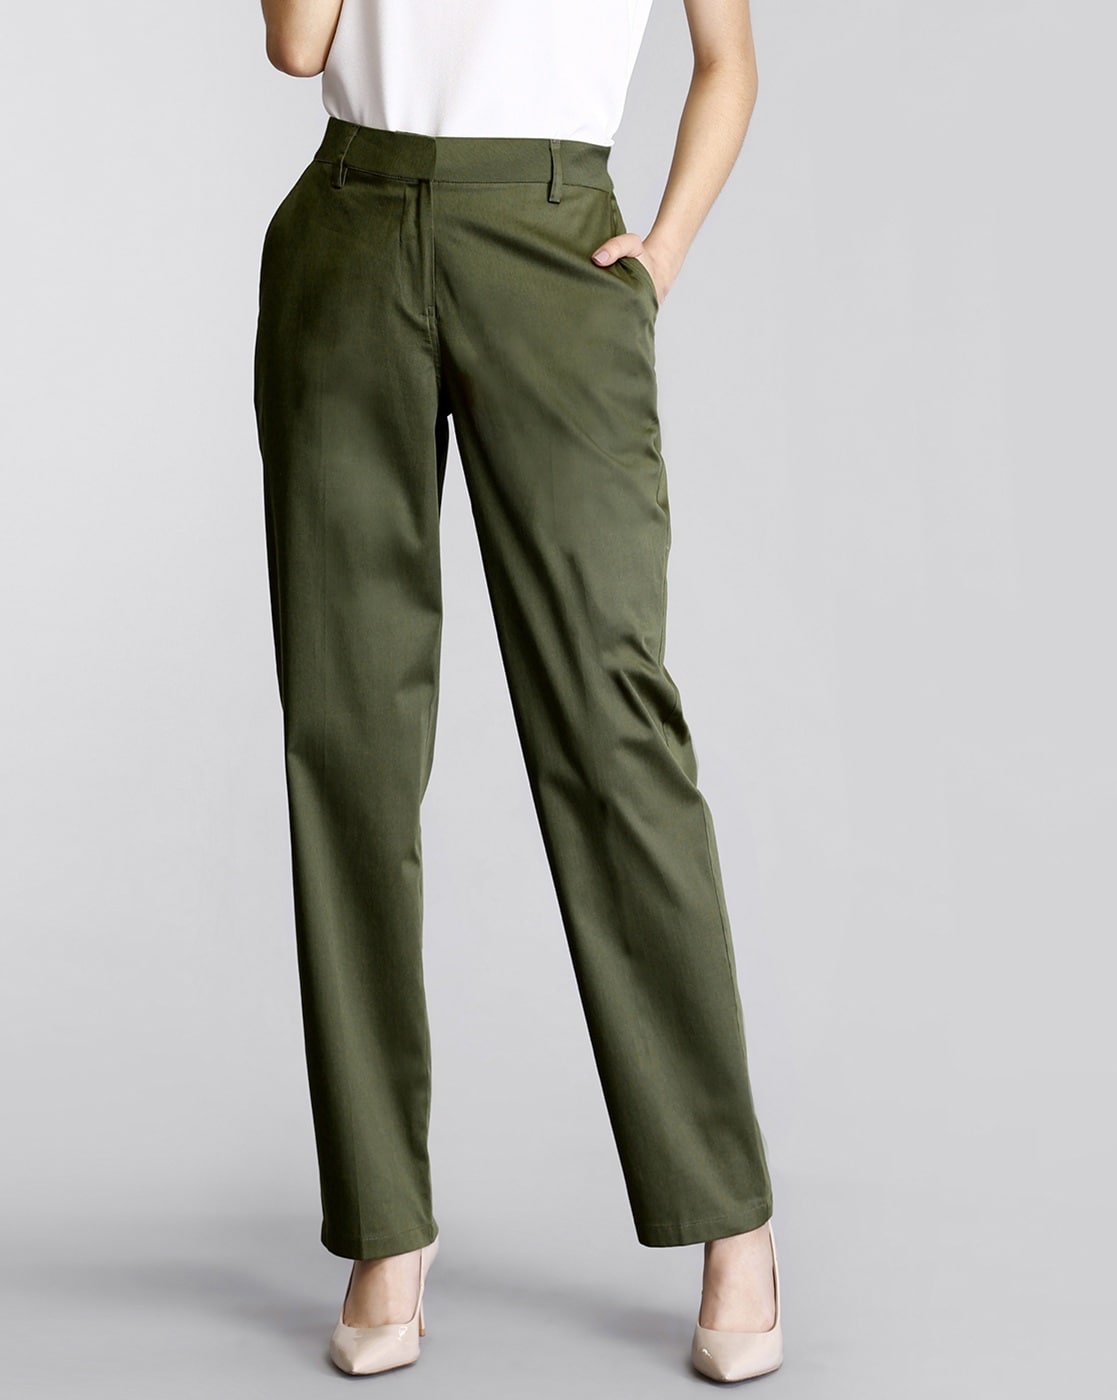 Style in the Streets | Olive green pants outfit, Work outfit, Fashion